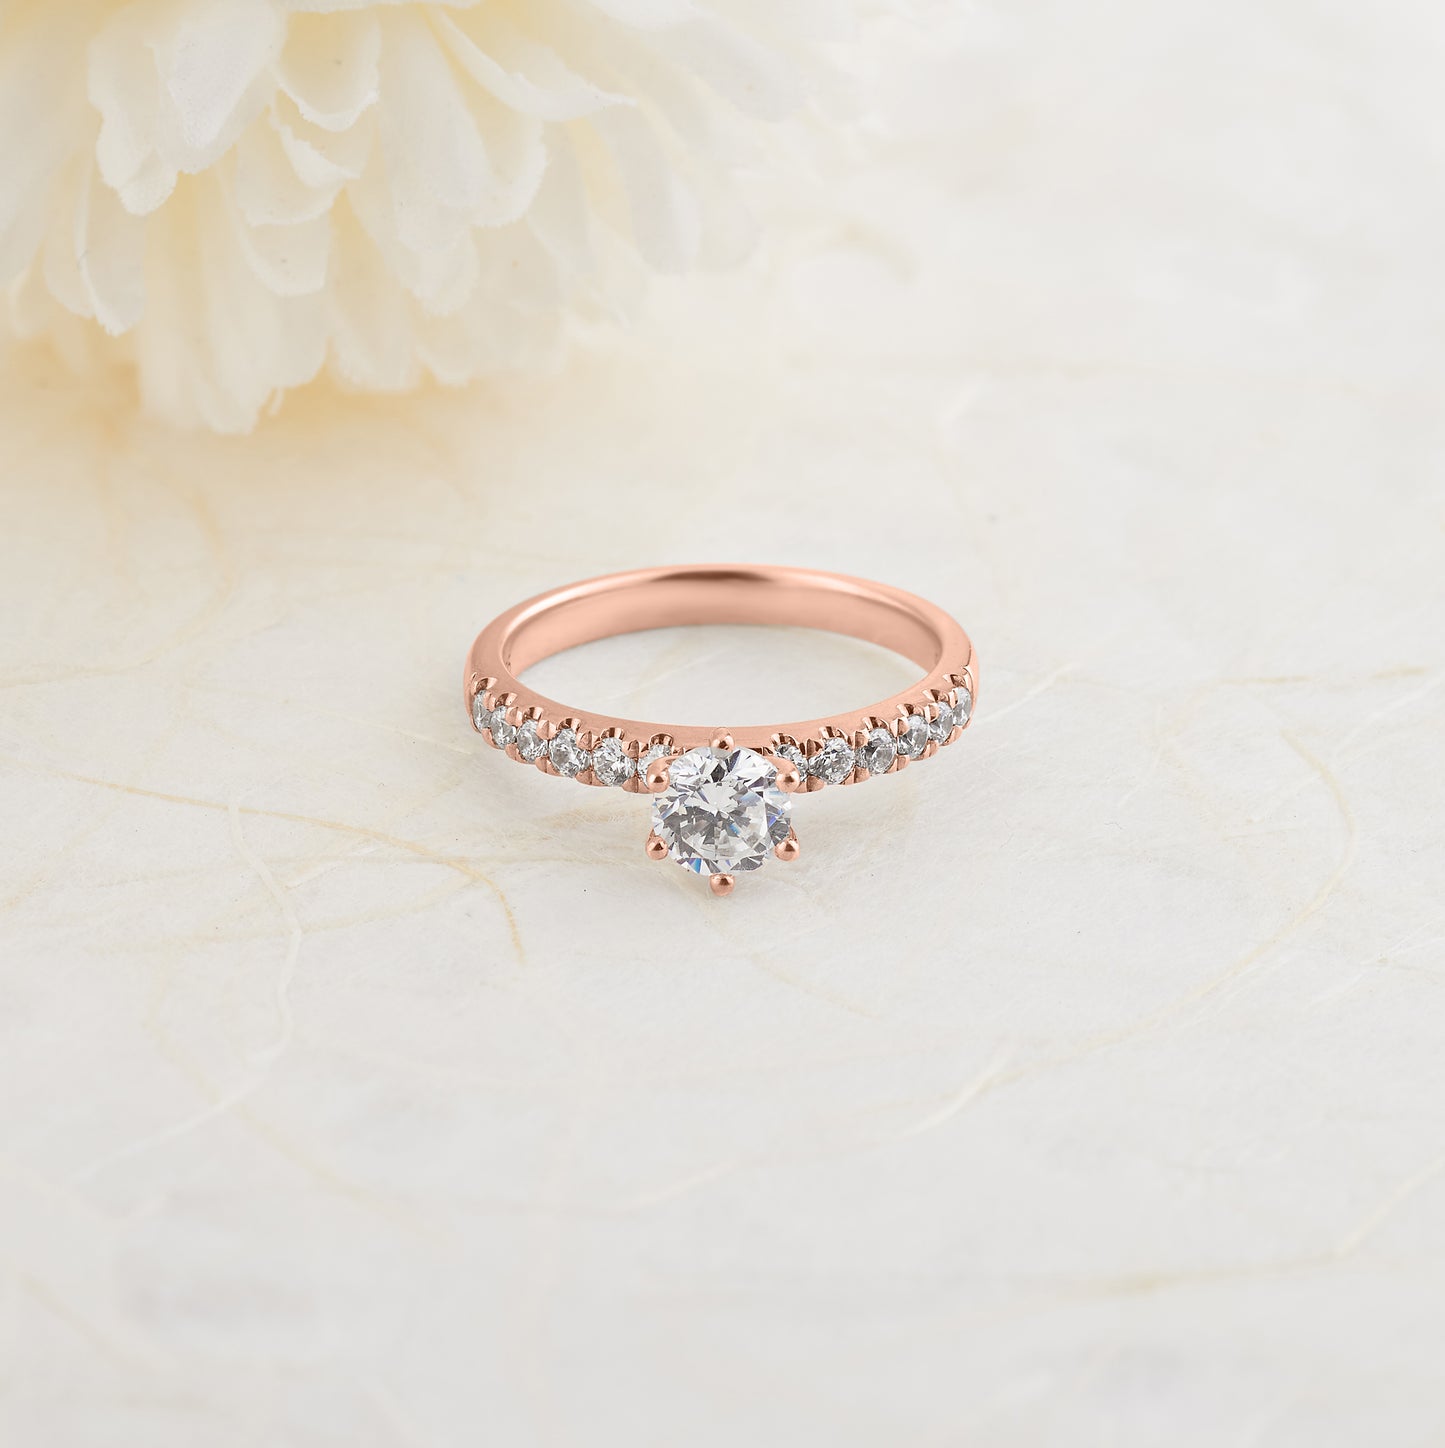 18K Rose Gold Round Brilliant Diamond Solitaire with Shoulder Accents Engagement Ring 1.0tdw 0.66ct